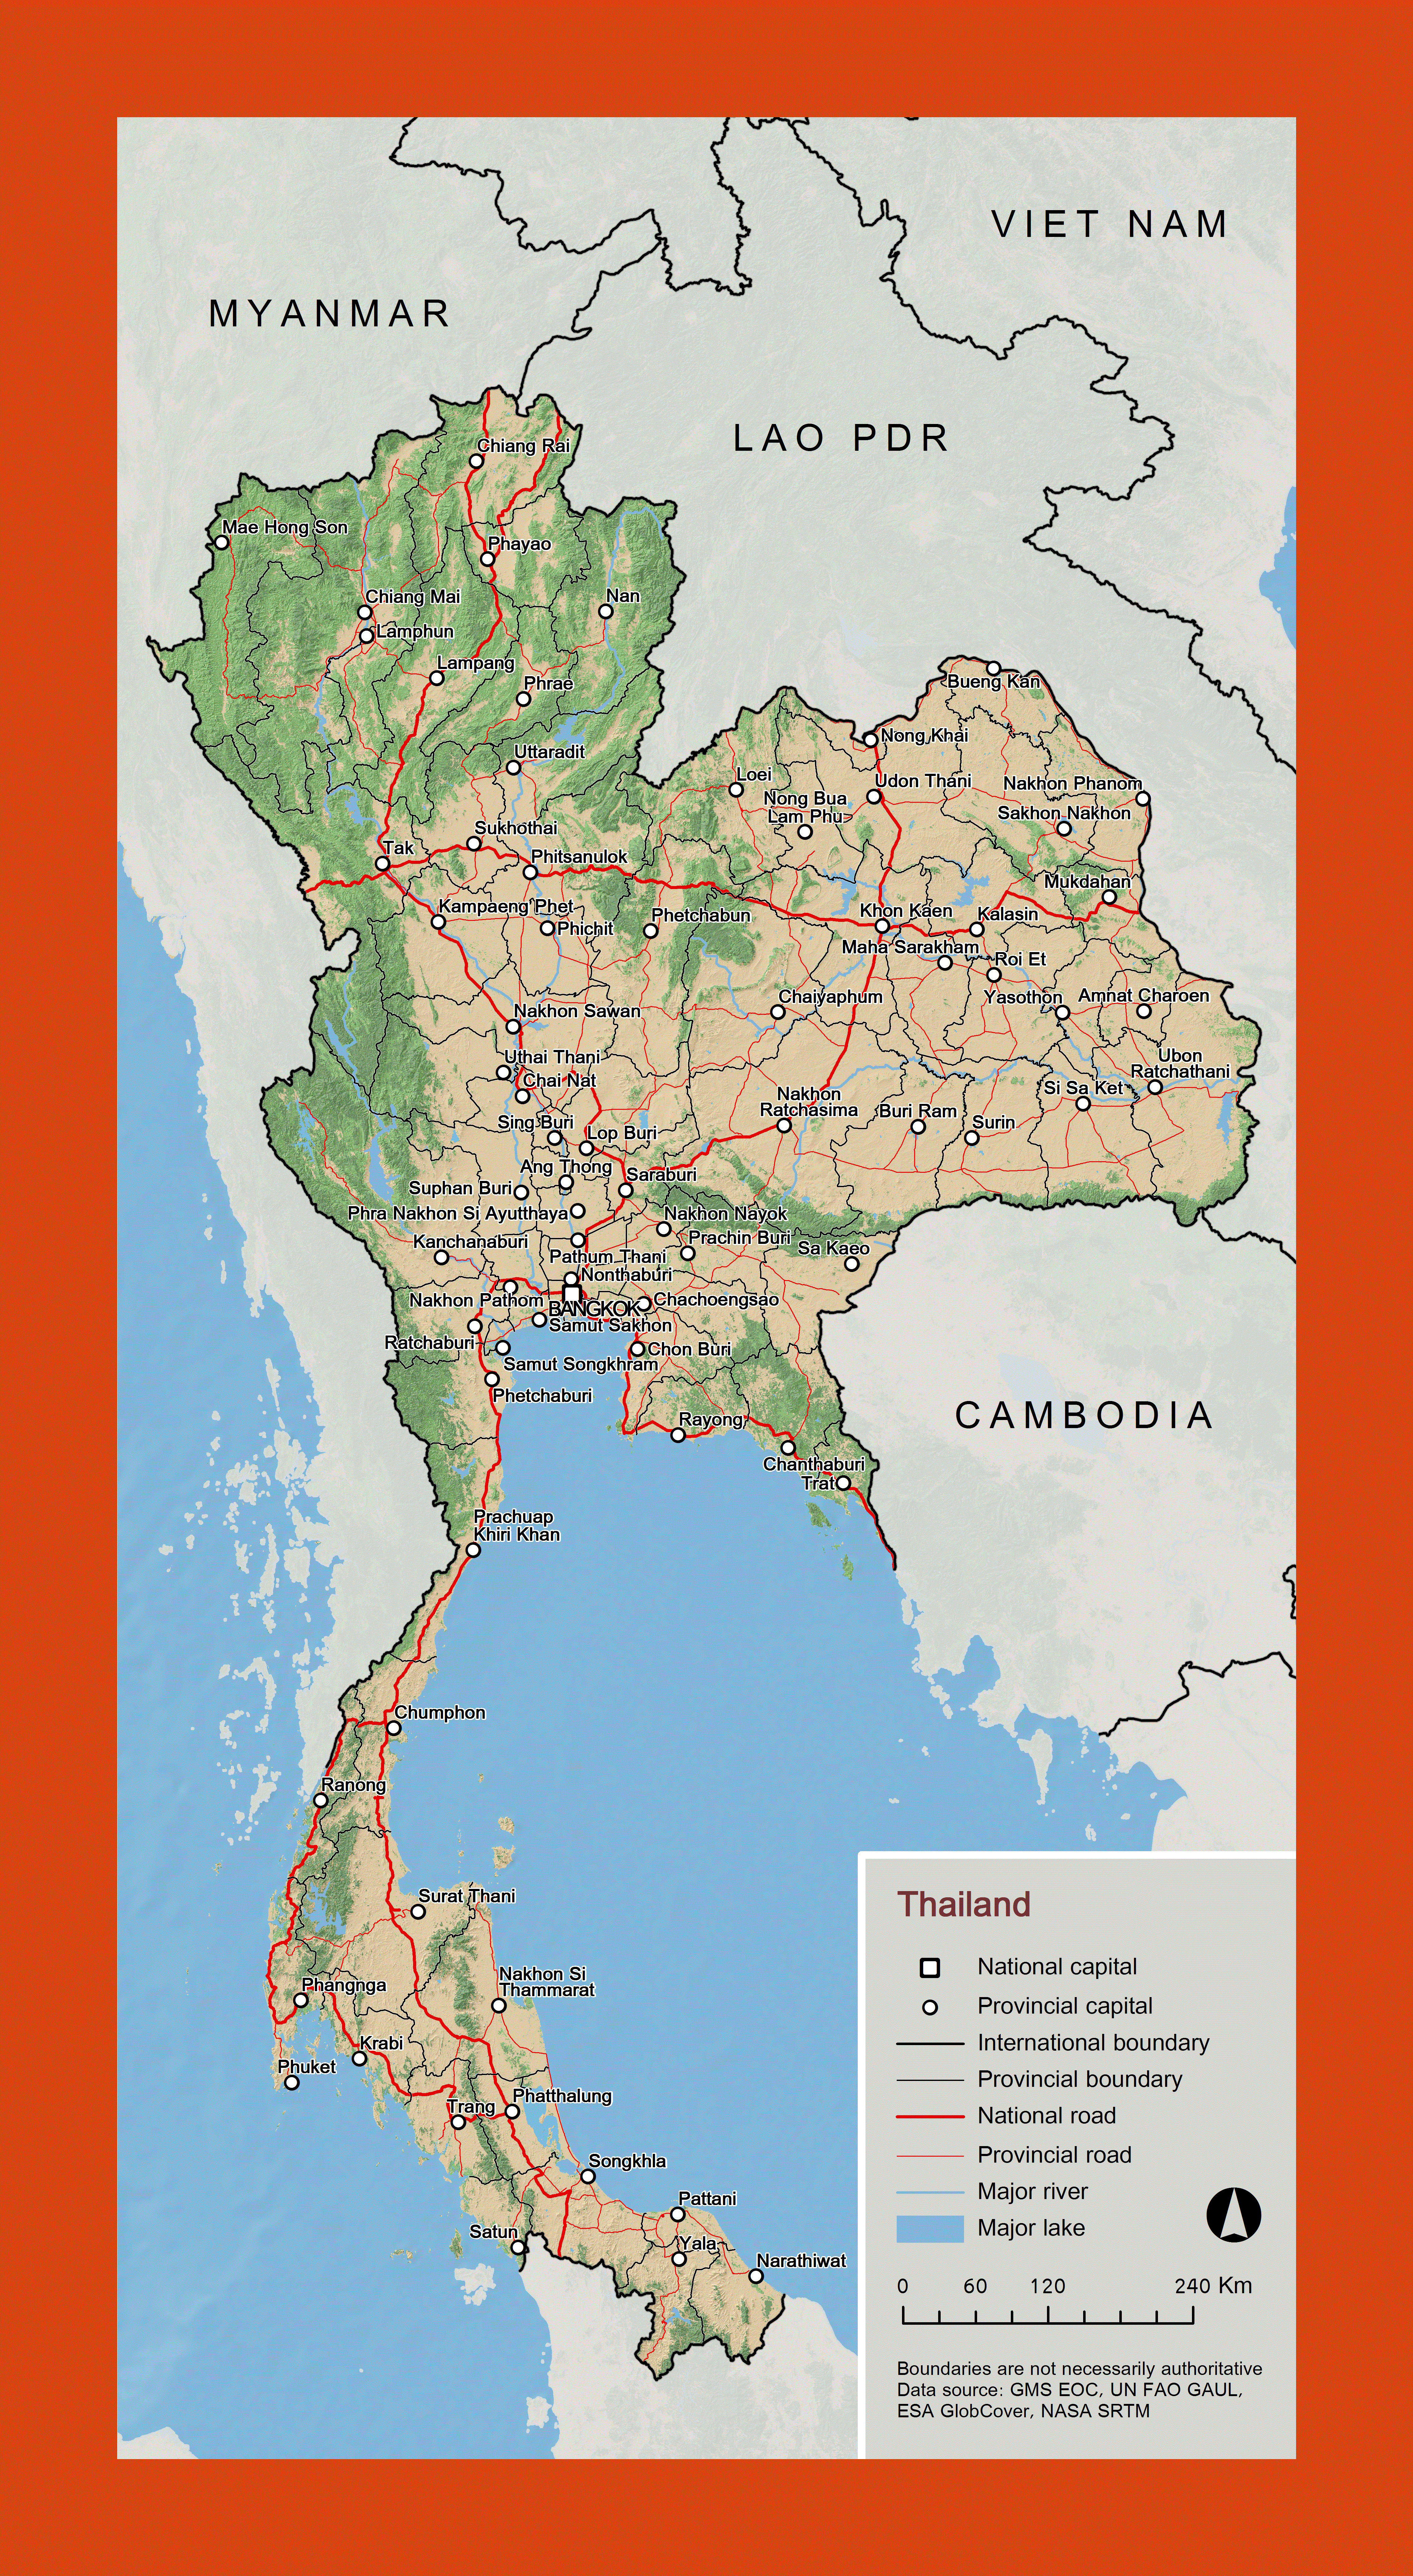 Overview Map Of Thailand Maps Of Thailand Maps Of Asia Gif Map Maps Of The World In Gif Format Maps Of The Whole World